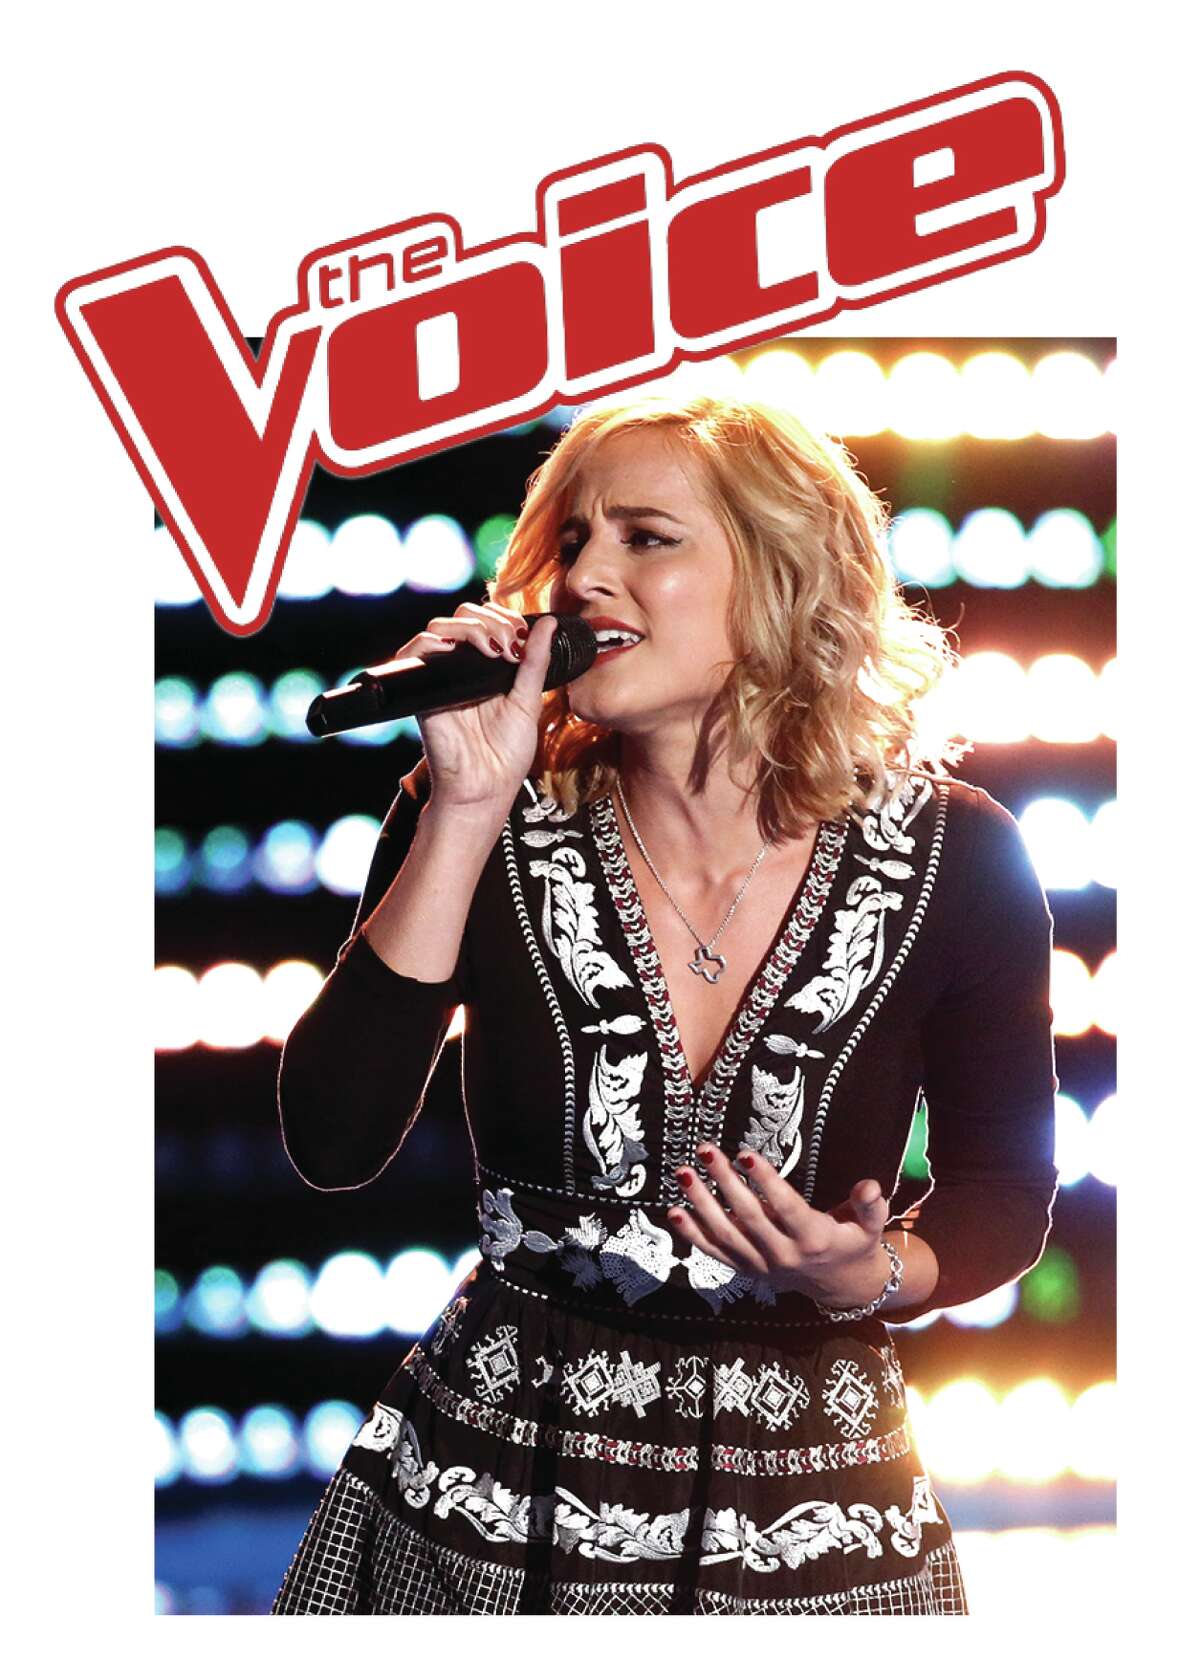 Mary Sarah, a contestant on Season 10 of "The Voice," will open the Sharity Productions concert featuring Mickey Gilley and Mary Sarah.